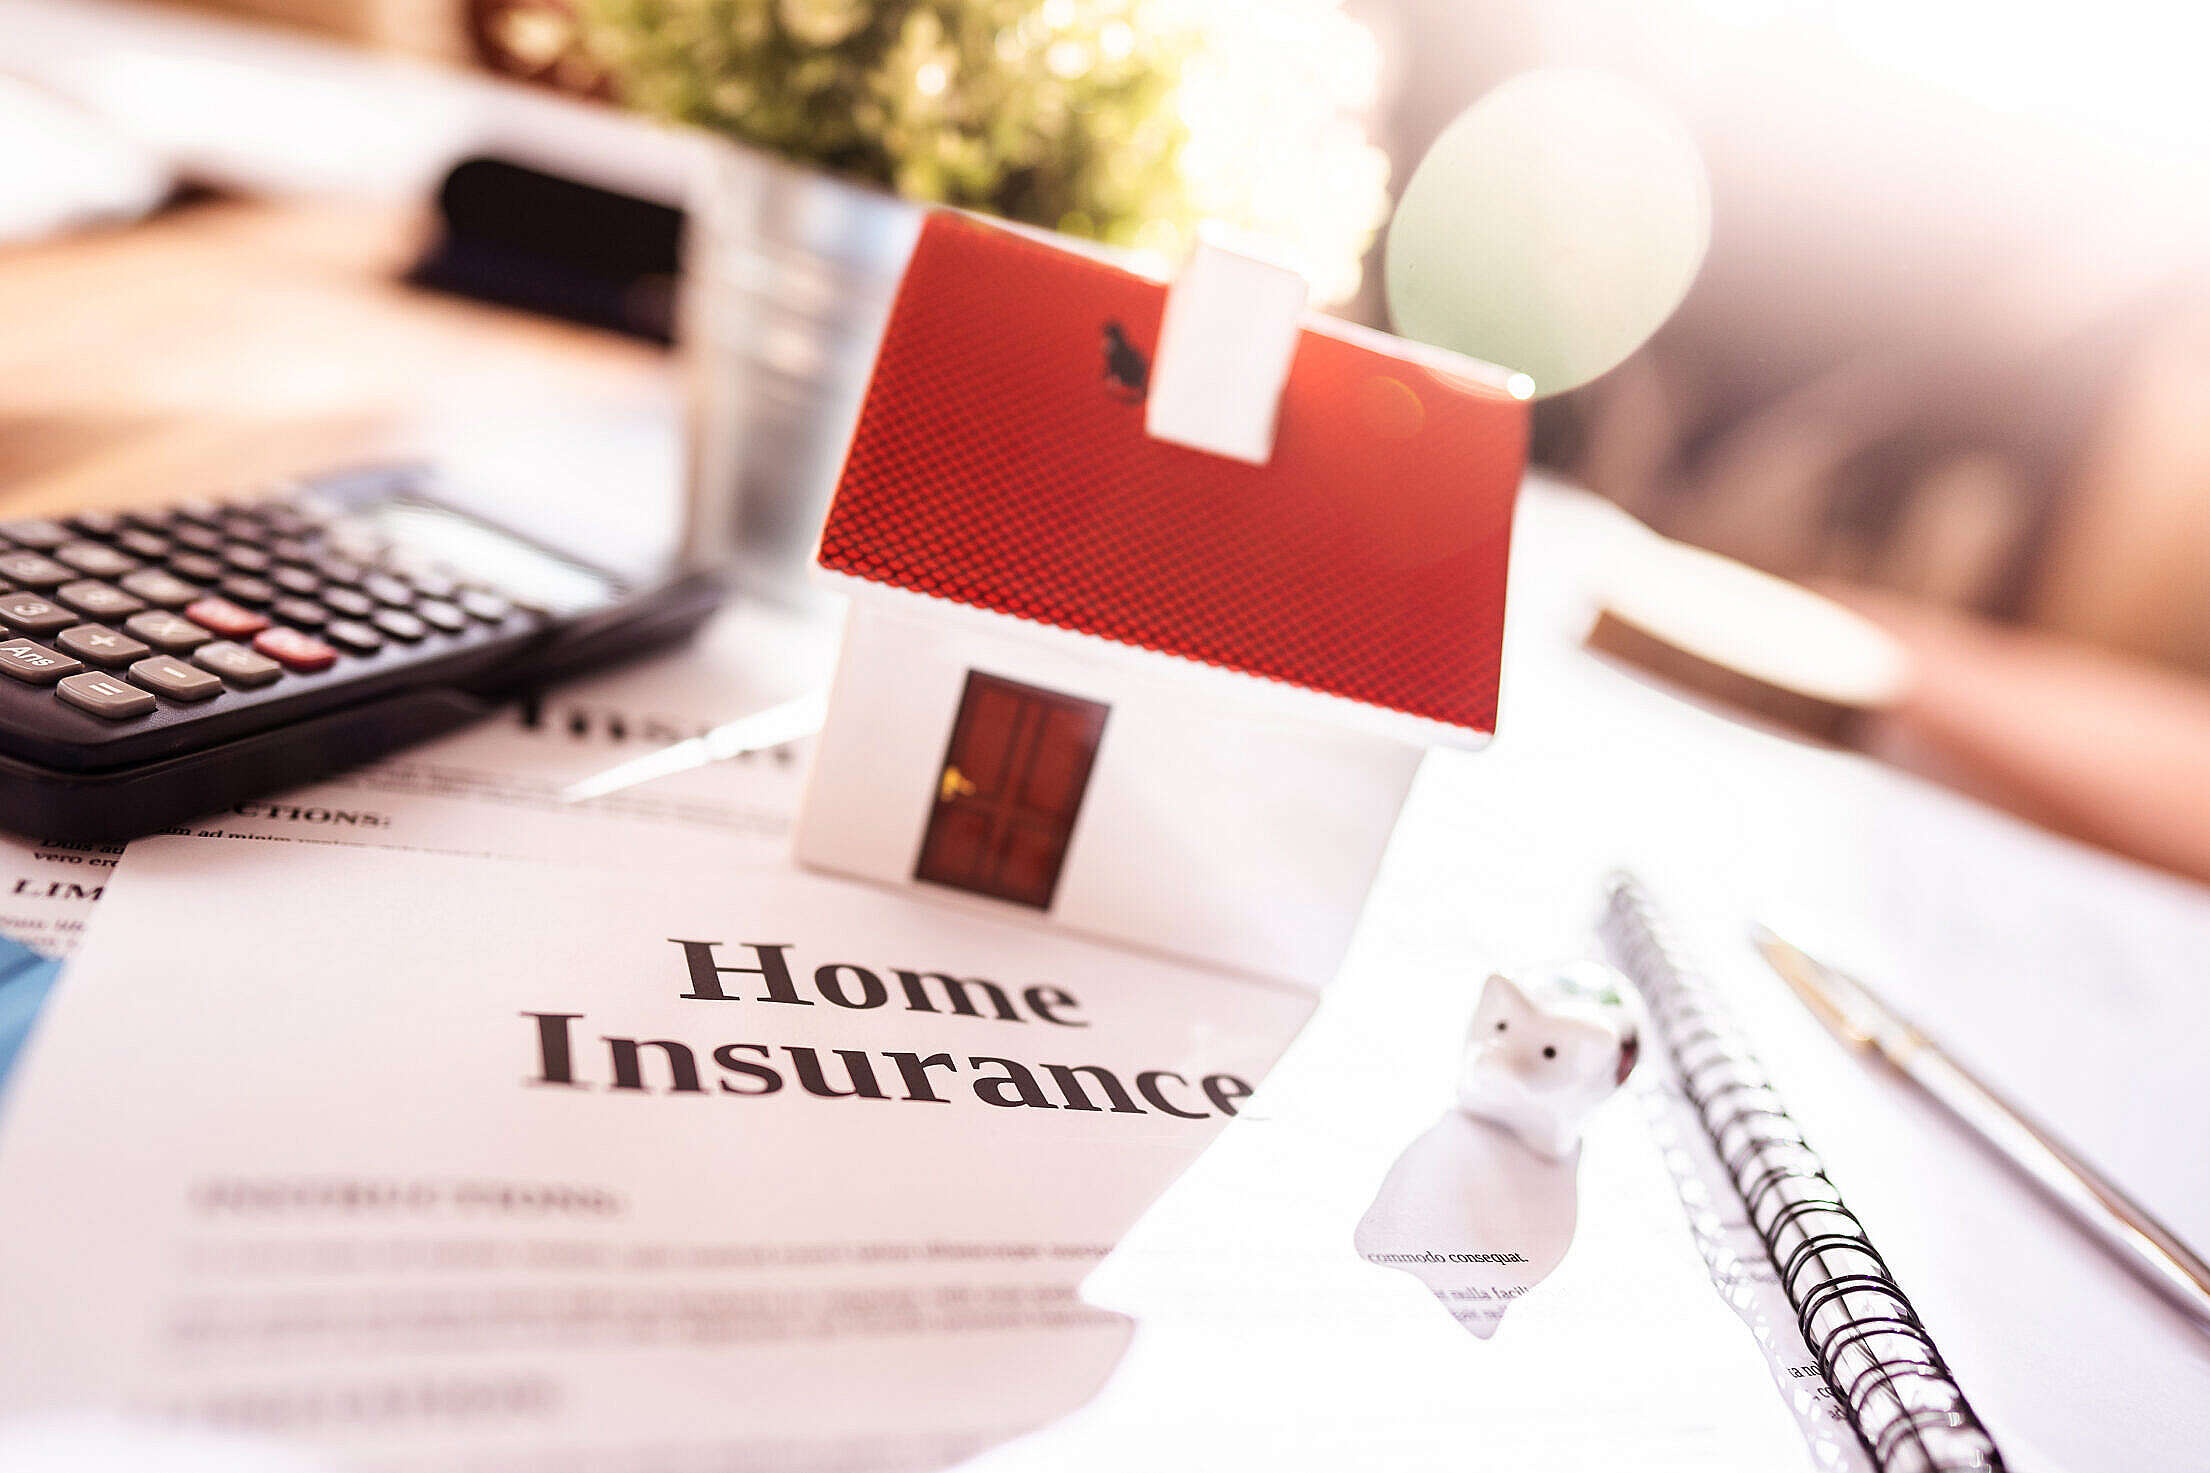 Home Insurance Contract Free Stock Photo